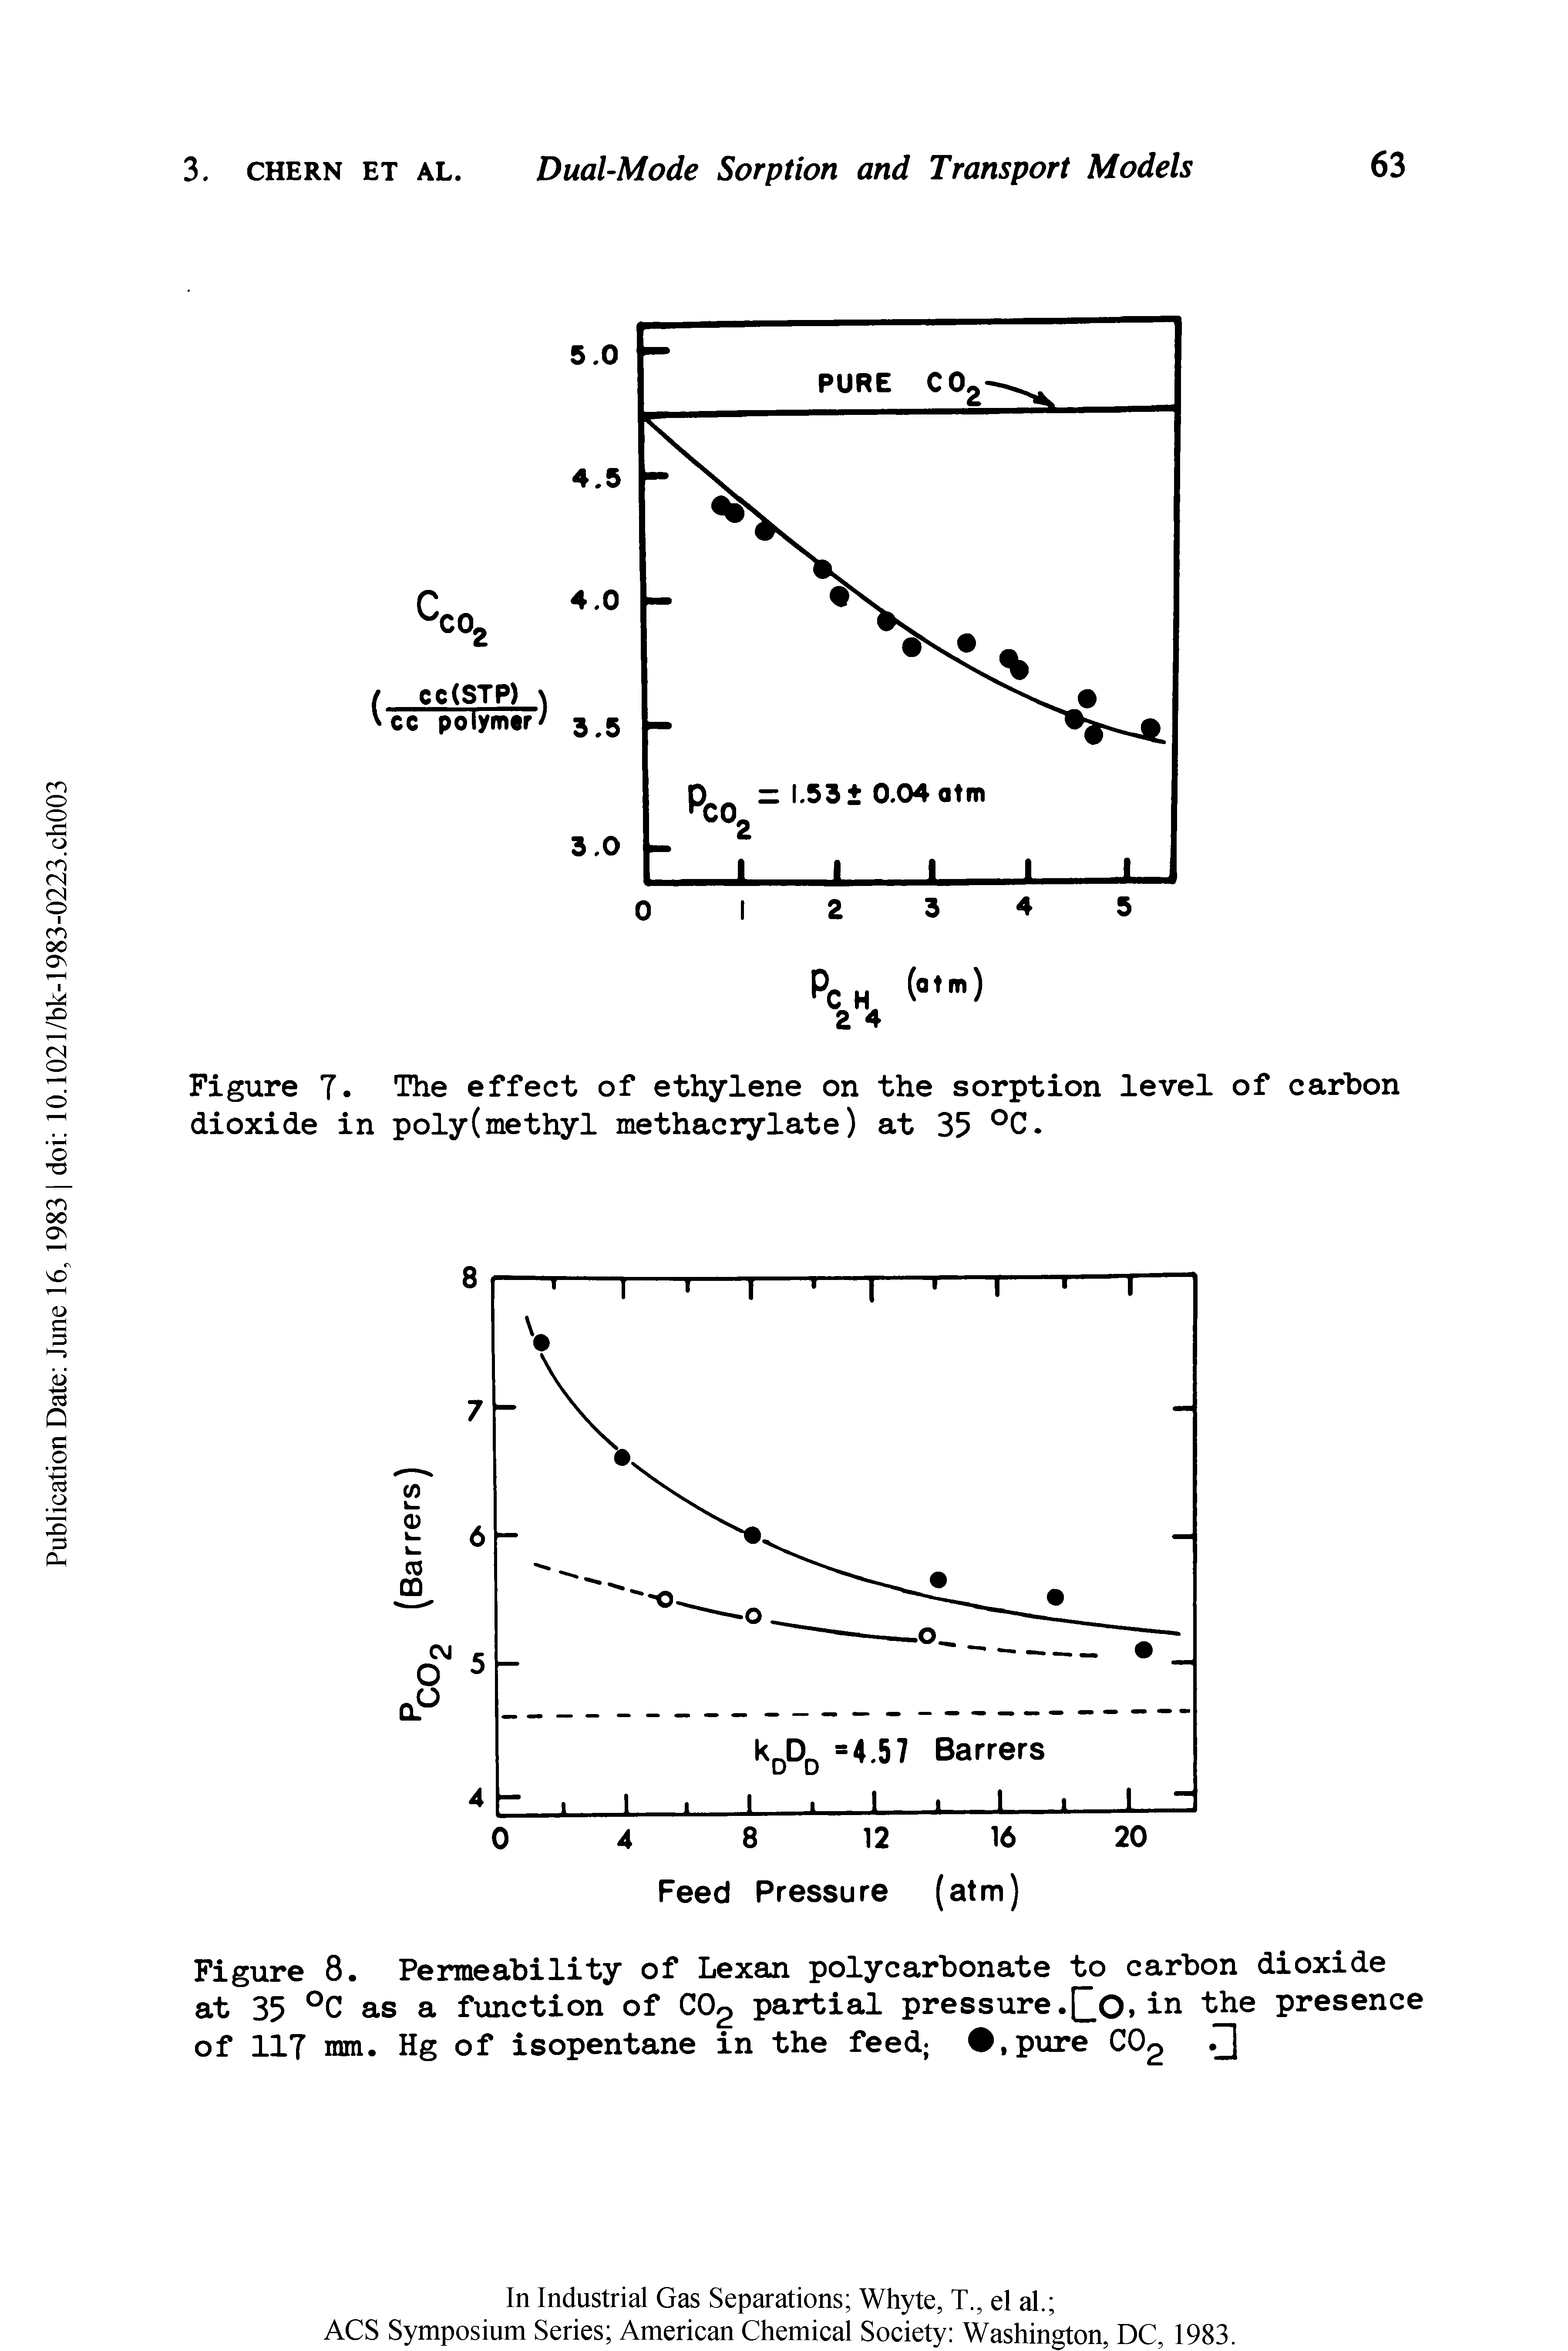 Figure 8. Permeability of Lexan polycarbonate to carbon dioxide at 35 °C as a function of C02 partial pressure.Qo, in the presence of 117 mm. Hg of isopentane in the feed , pure C02 Q...